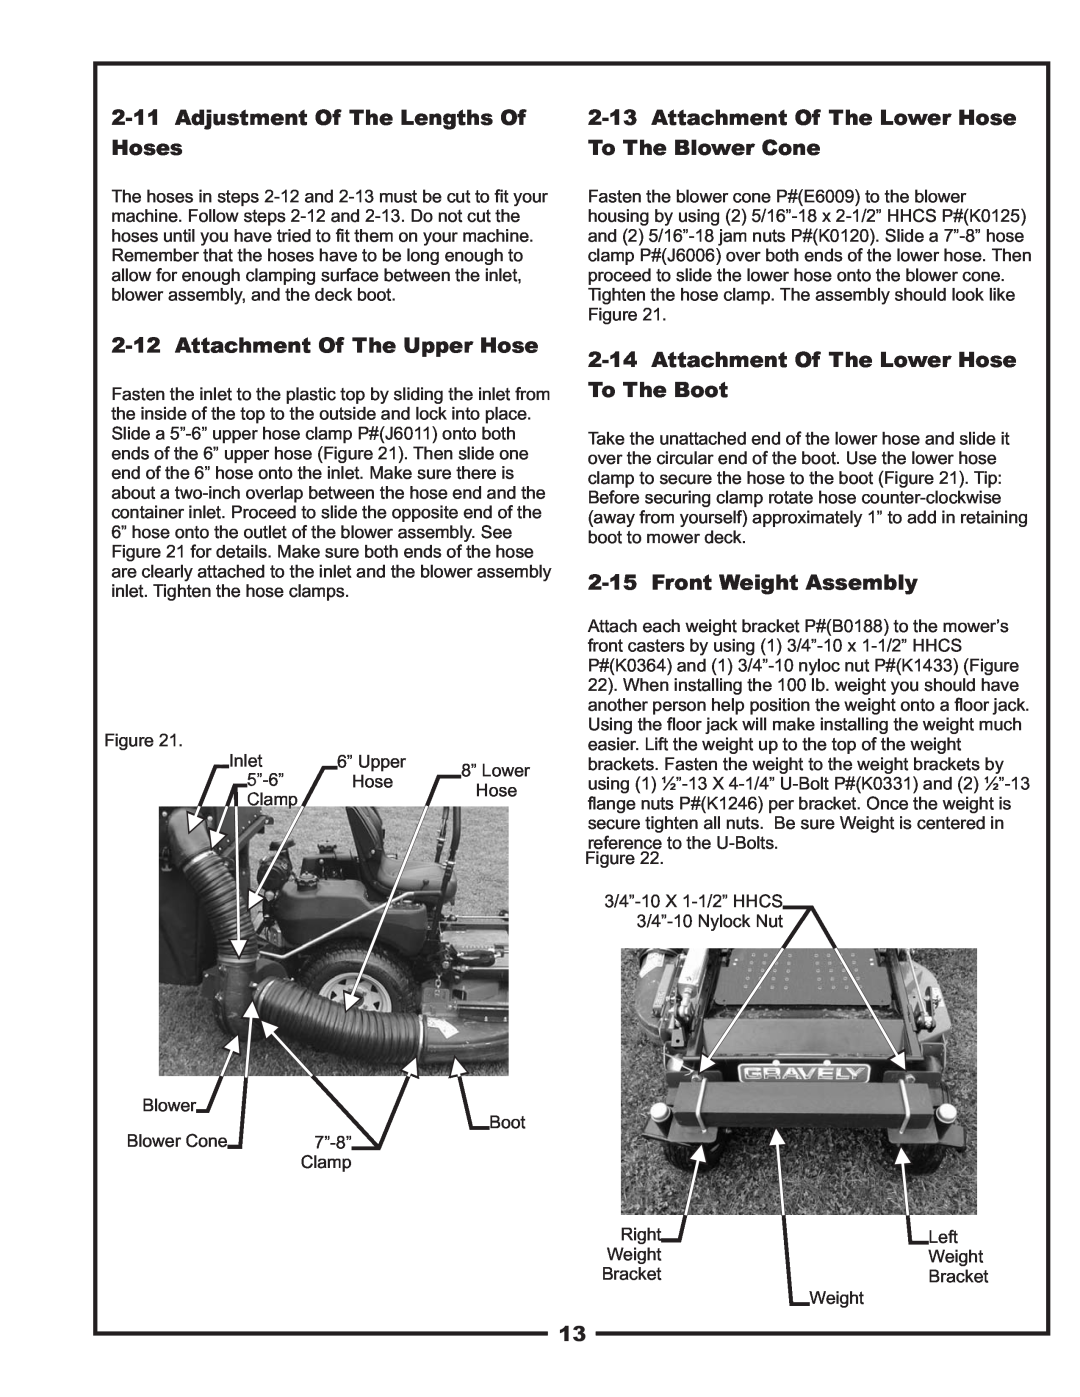 Gravely 12031301, 12031302 manual Adjustment Of The Lengths Of Hoses, Attachment Of The Upper Hose, Front Weight Assembly 